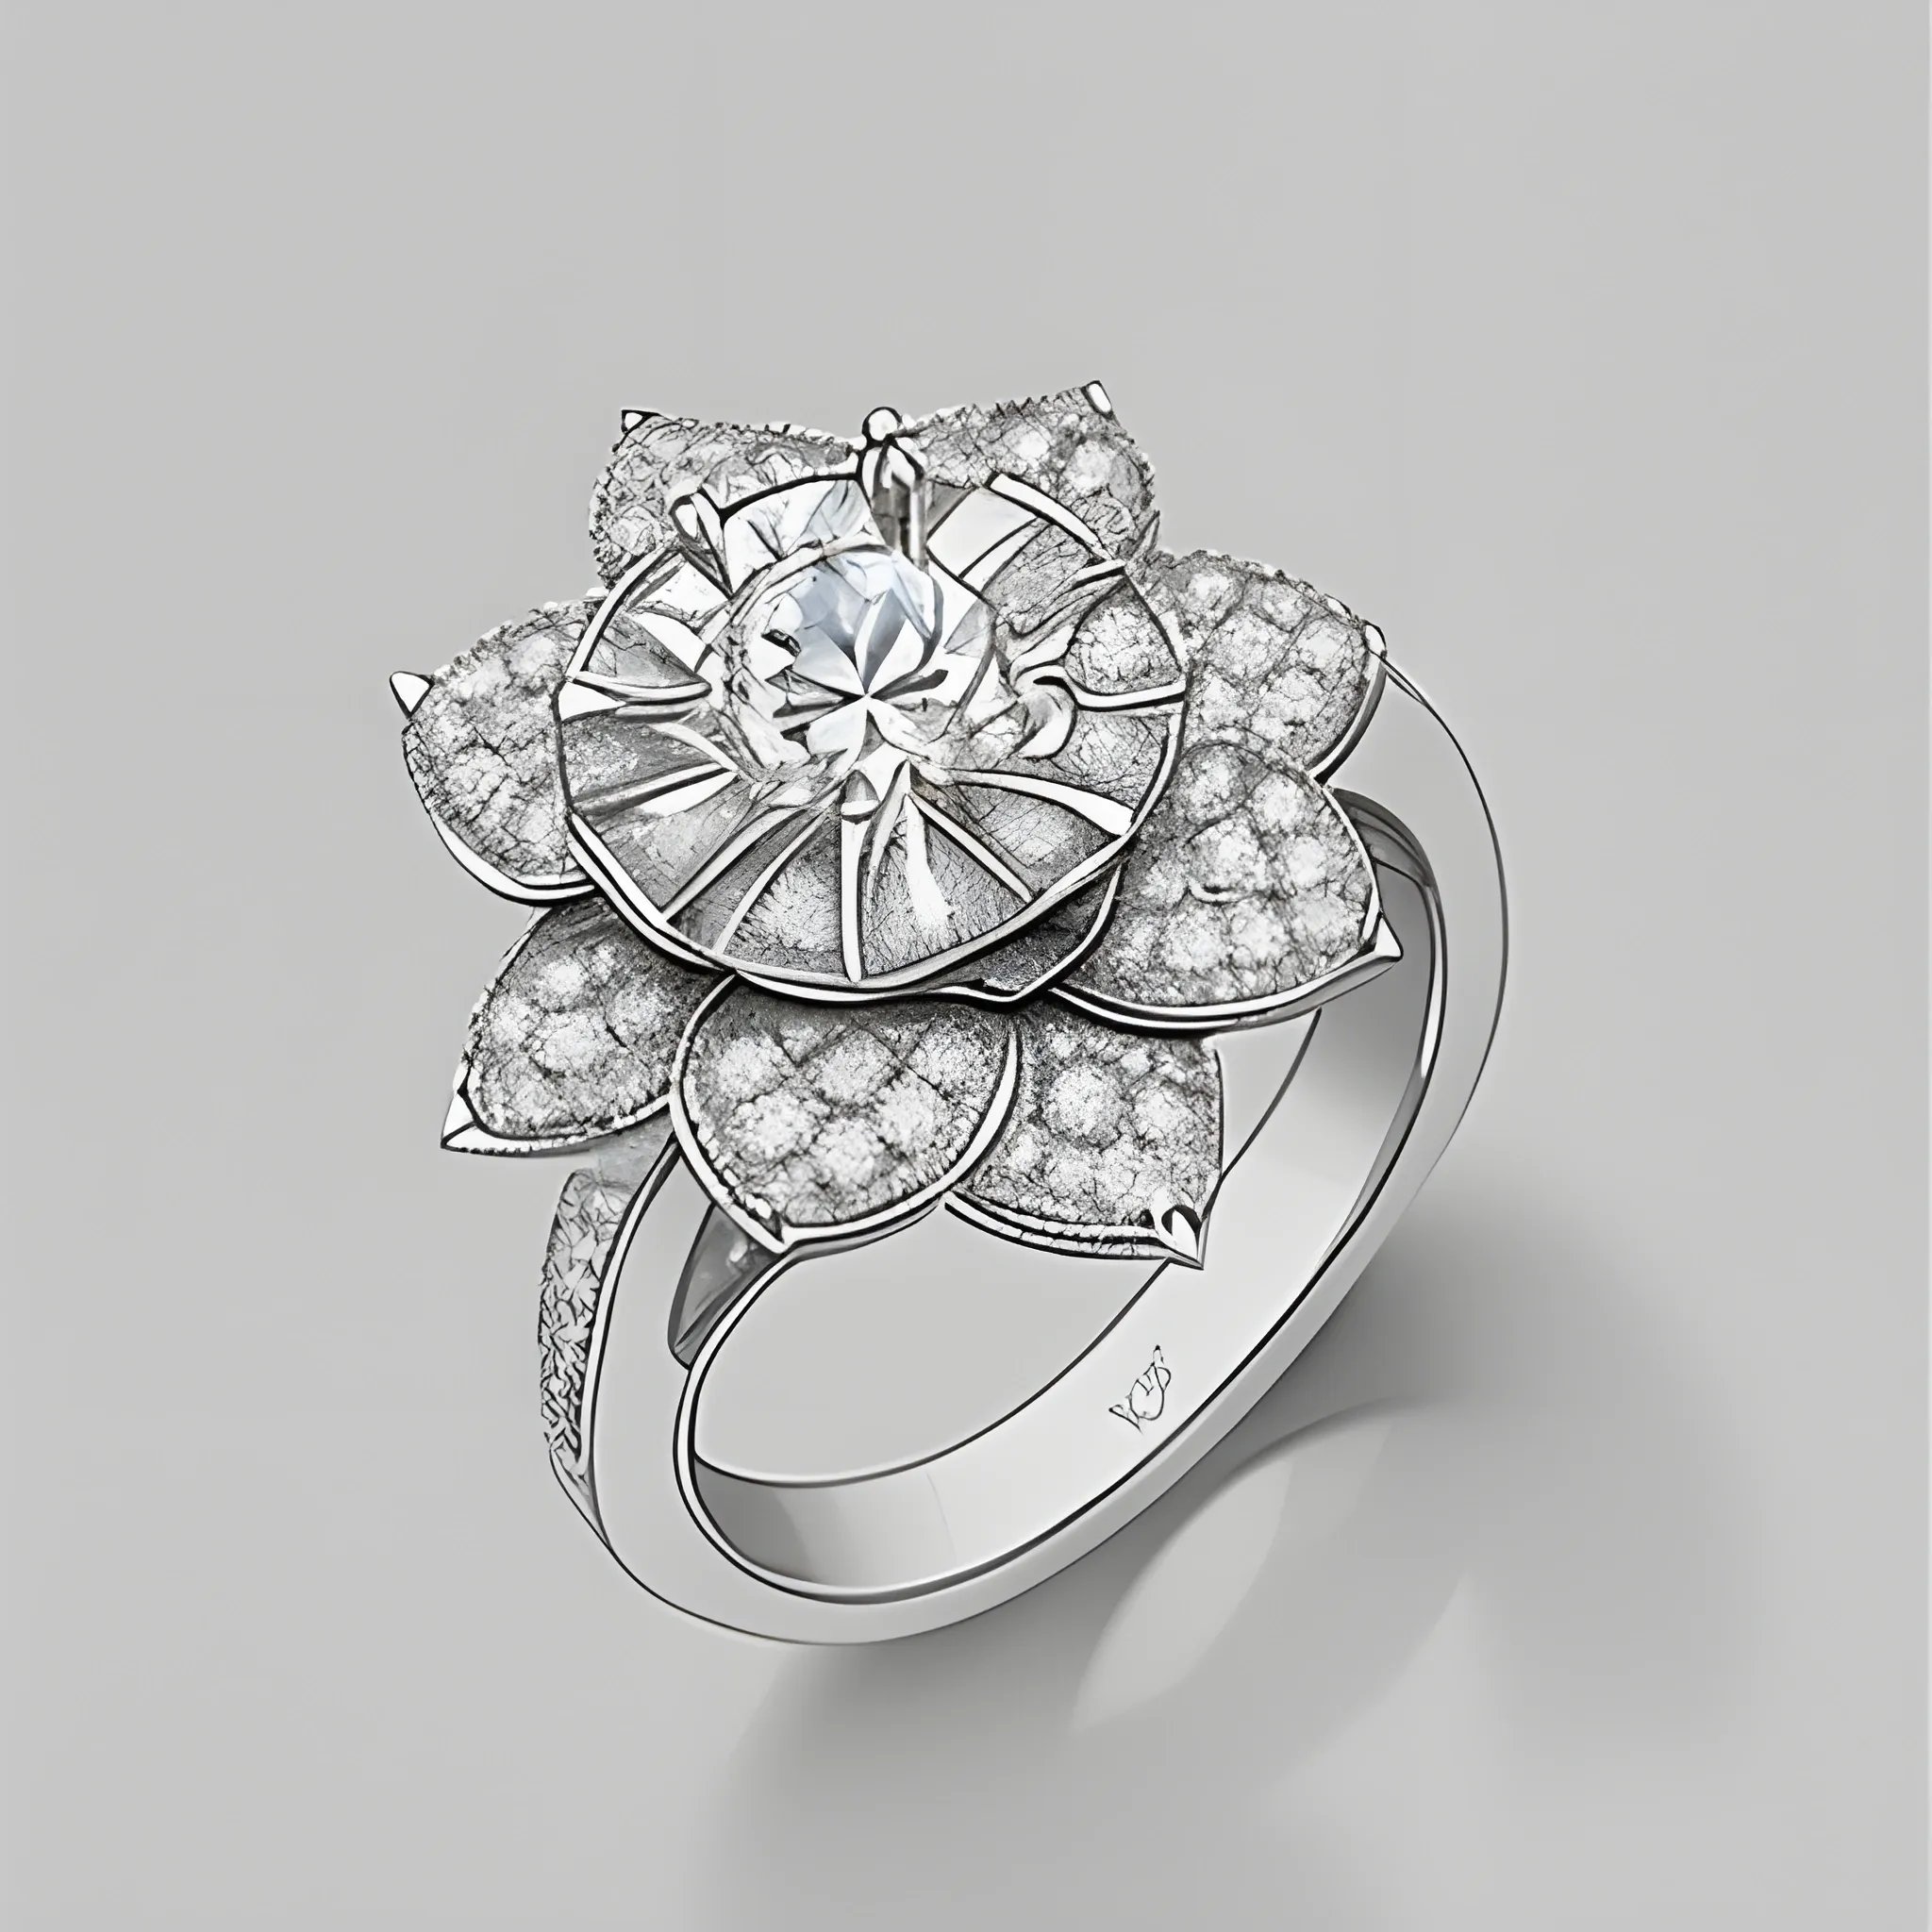 , Pencil Sketch Create a flower-shaped ring with a central white 0,05 carat diamond surrounded by 6 pice of drop shaped brown diamonds